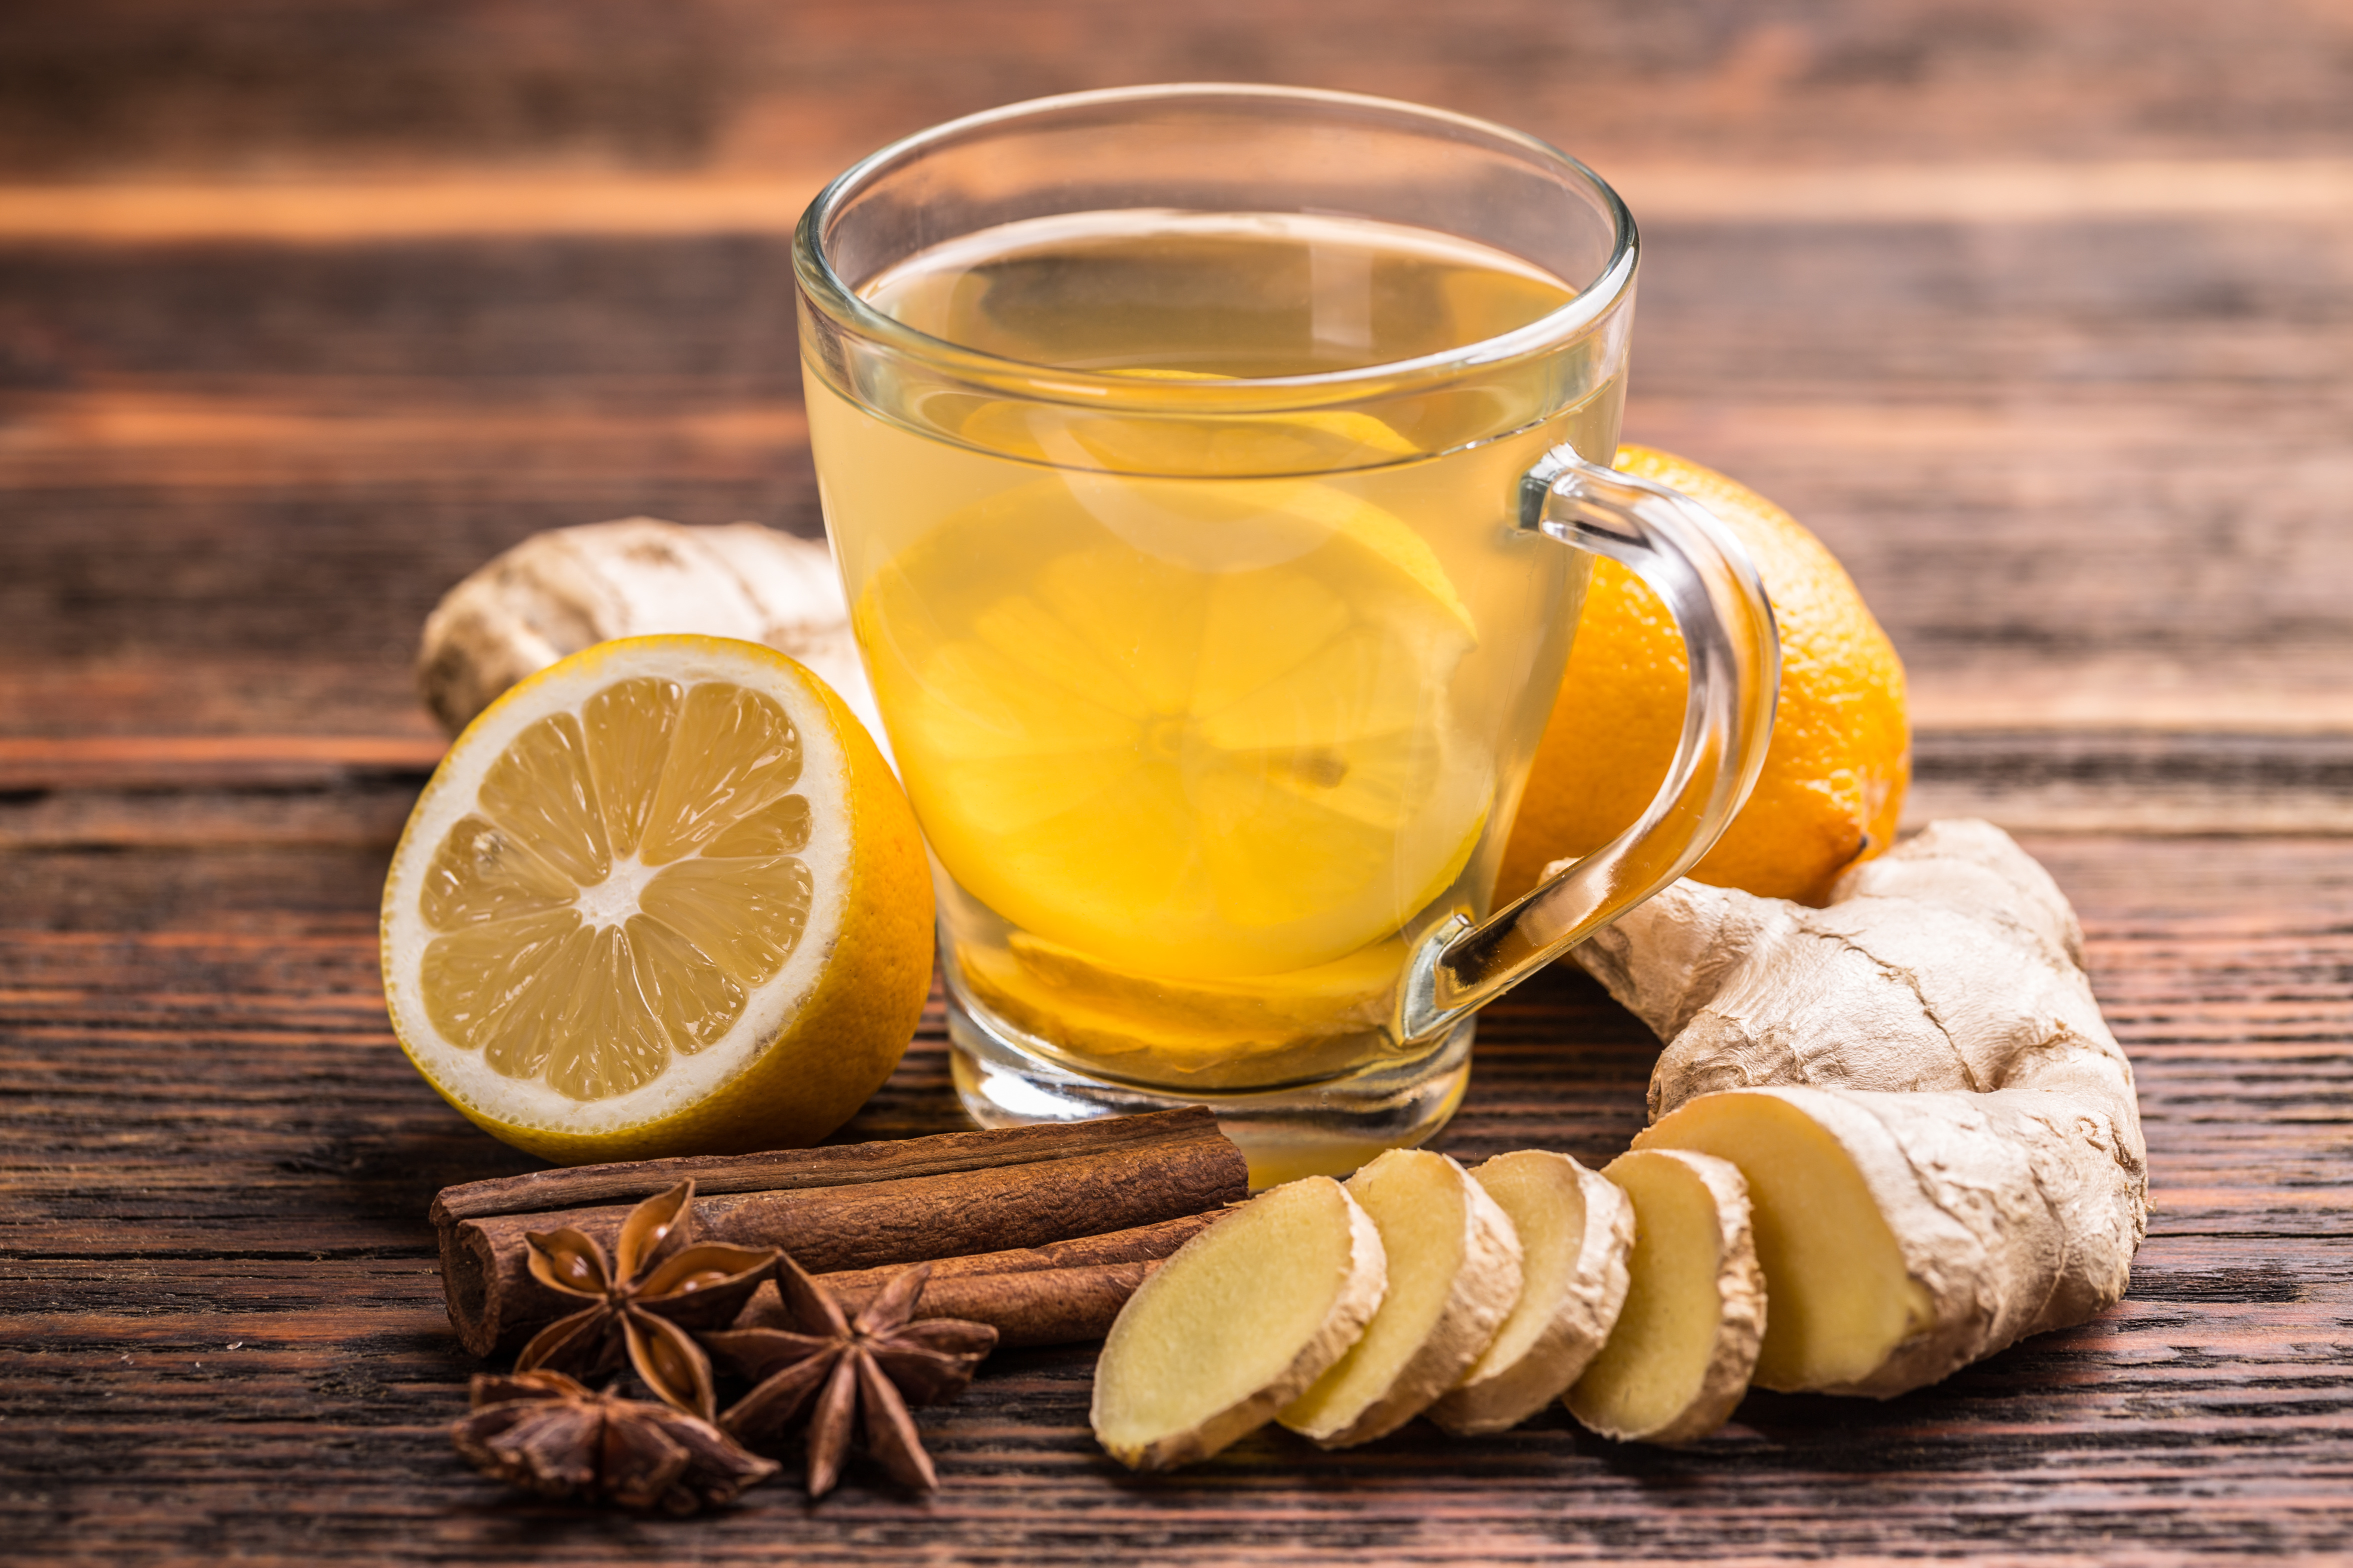 Cup of ginger tea with lemon on wooden table